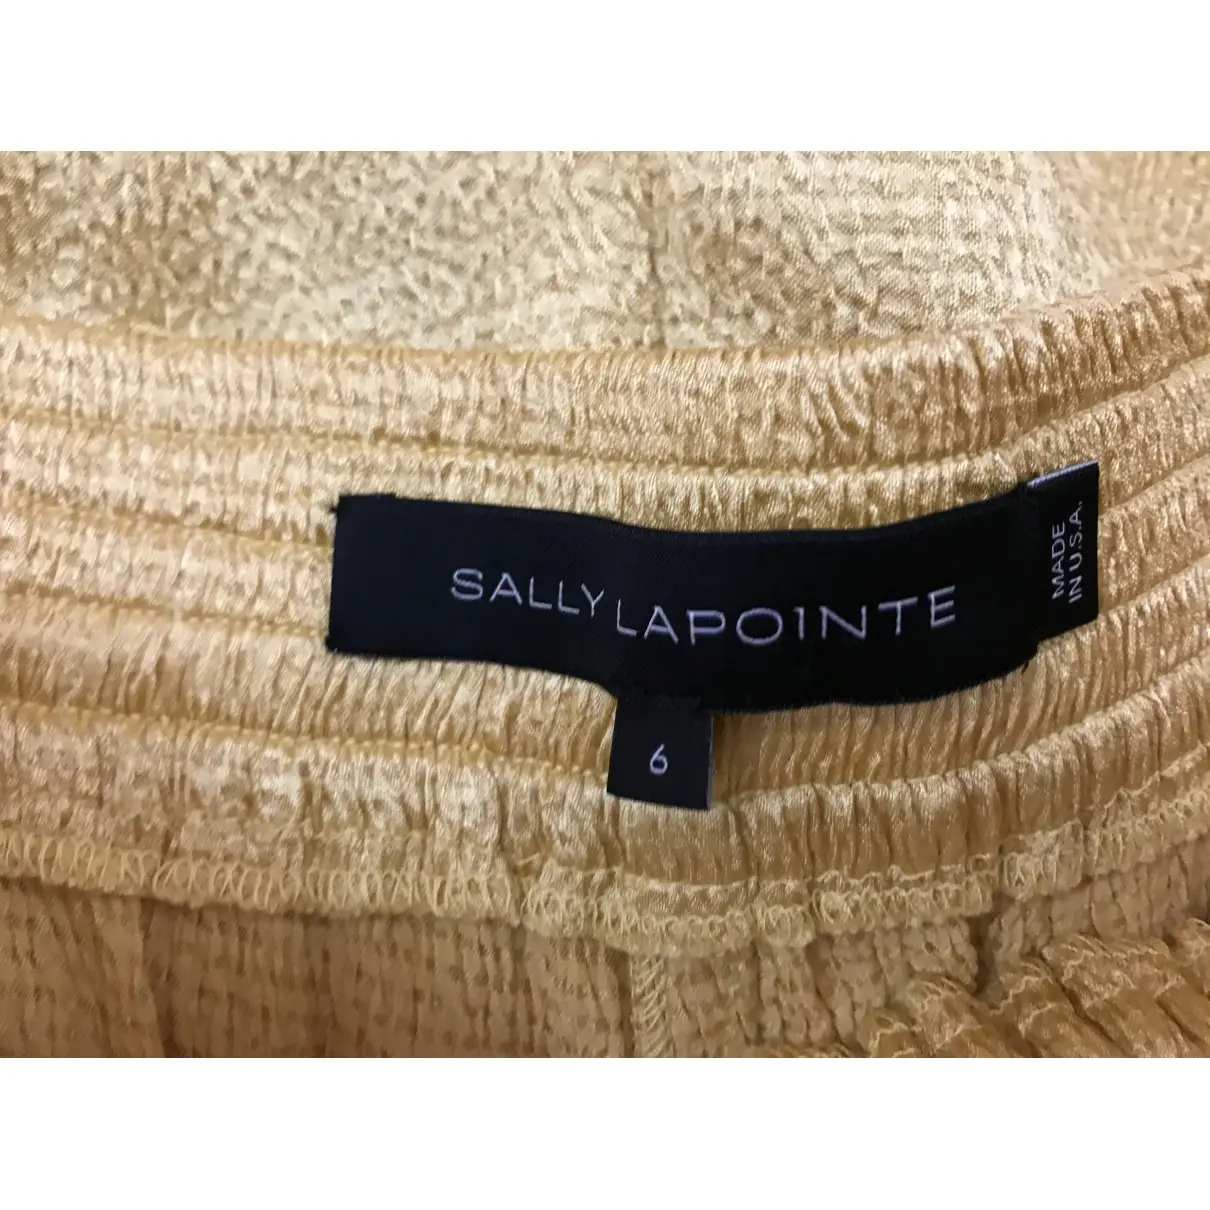 Buy Sally Lapointe Trousers online